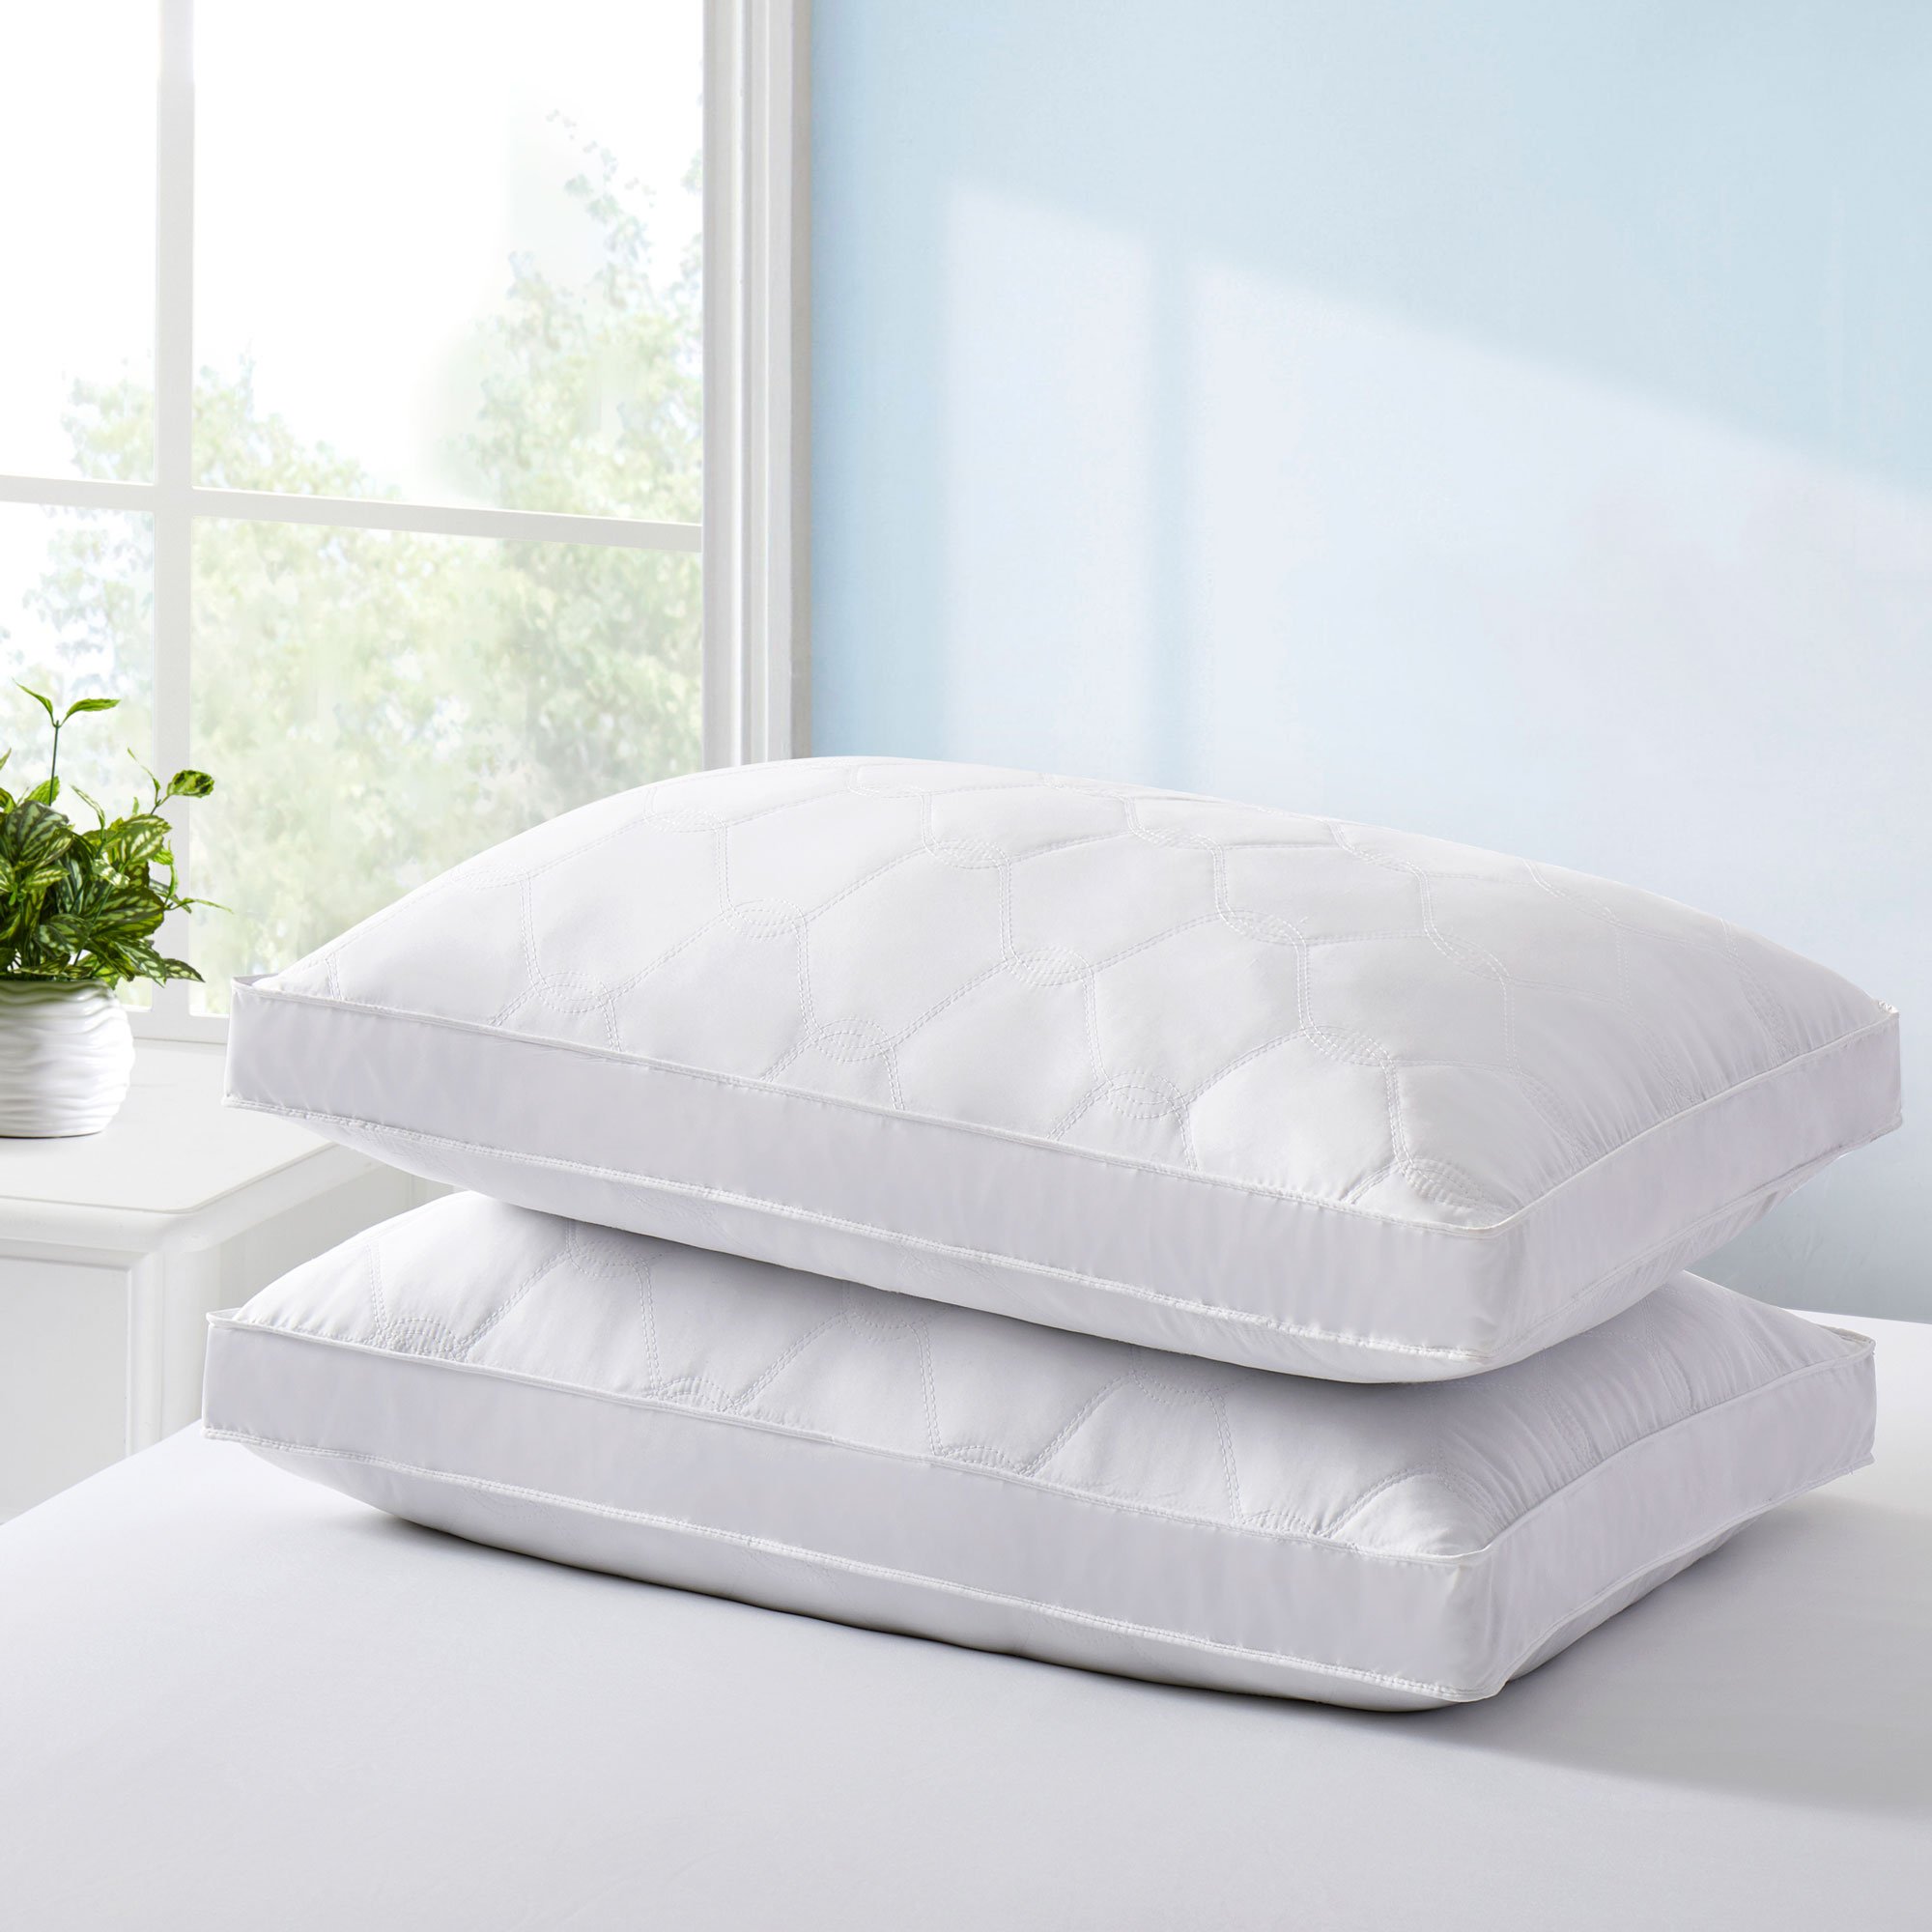 2 Pack Quilted Gusseted Feather And Down Pillow - STANDARD/QUEEN, WHITE